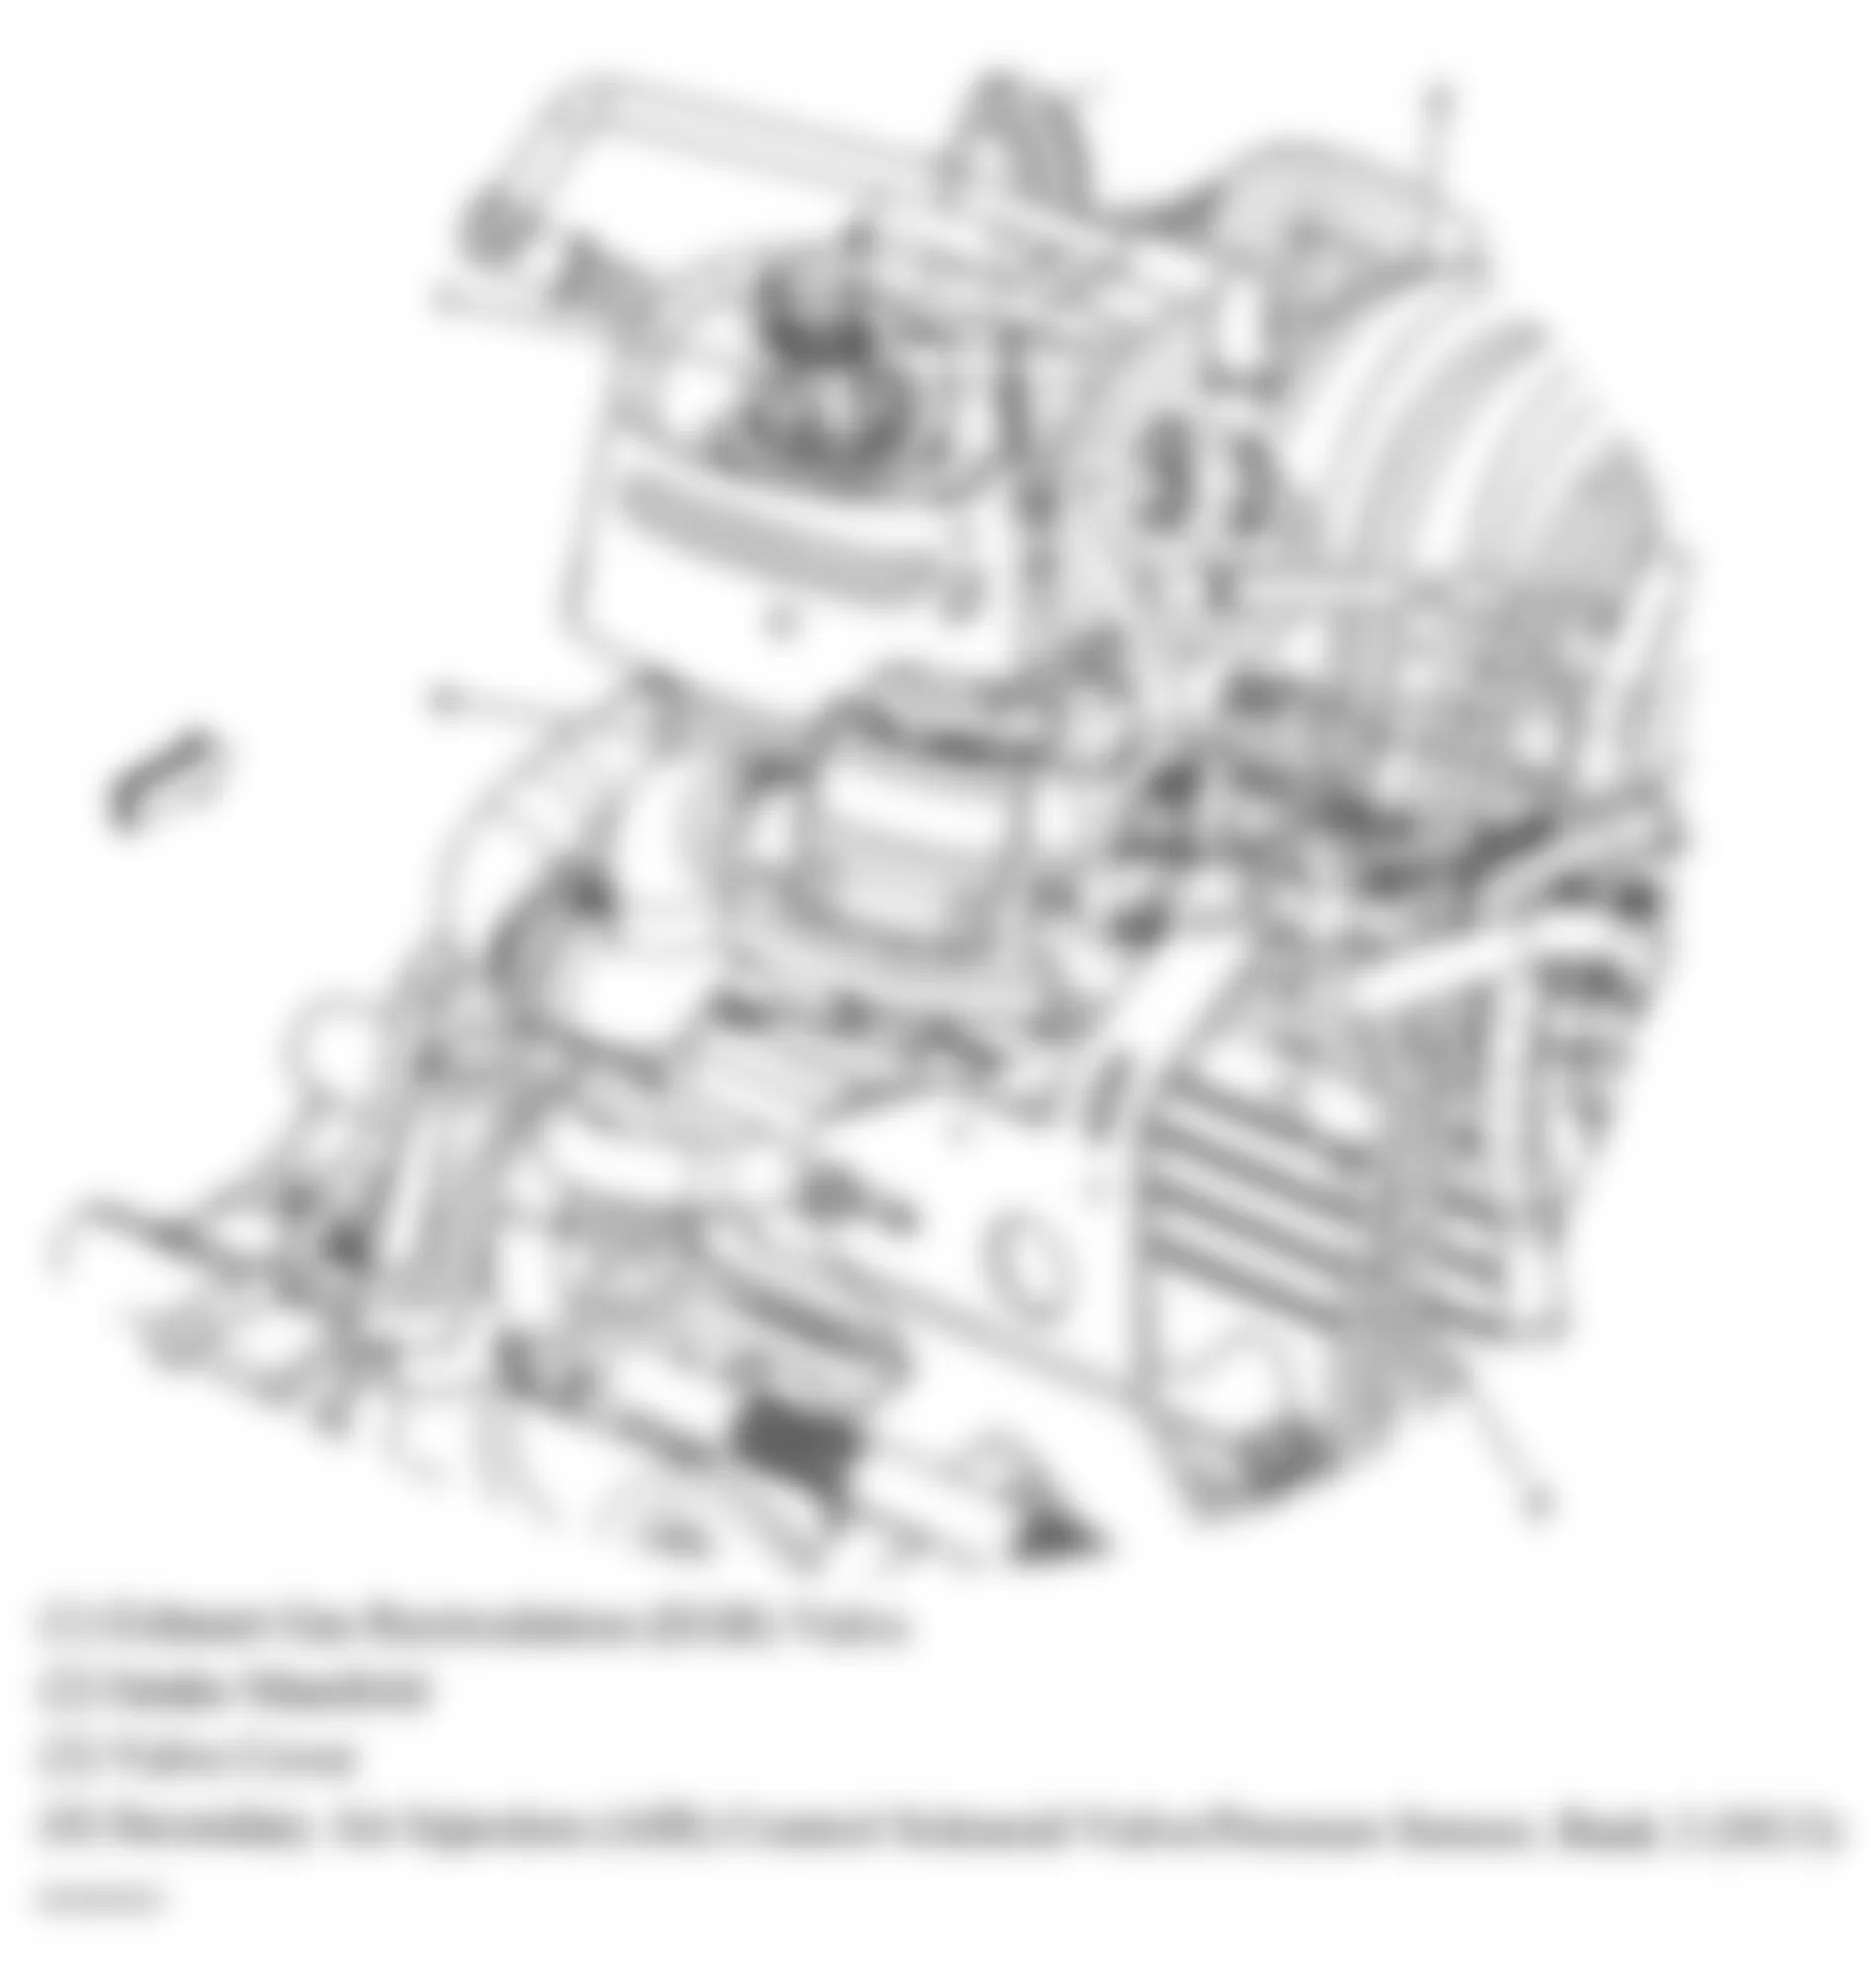 Buick LaCrosse CXS 2005 - Component Locations -  Upper Rear Of Engine (3.8L)